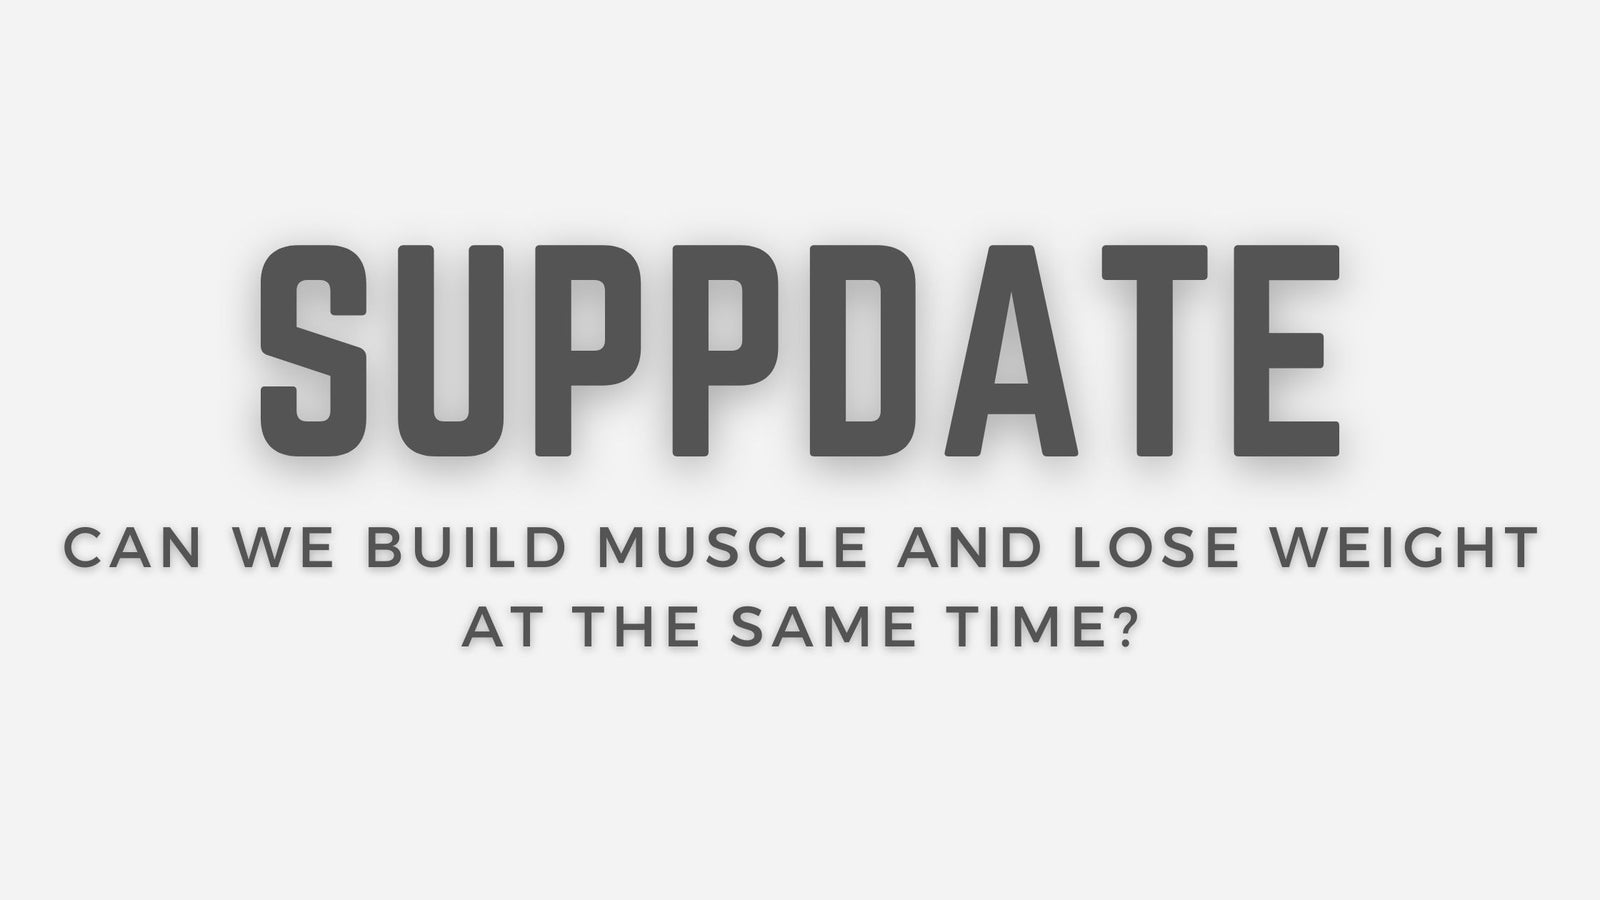 Can We Build Muscle And Lose Weight At The Same Time? - The Supps House LTD